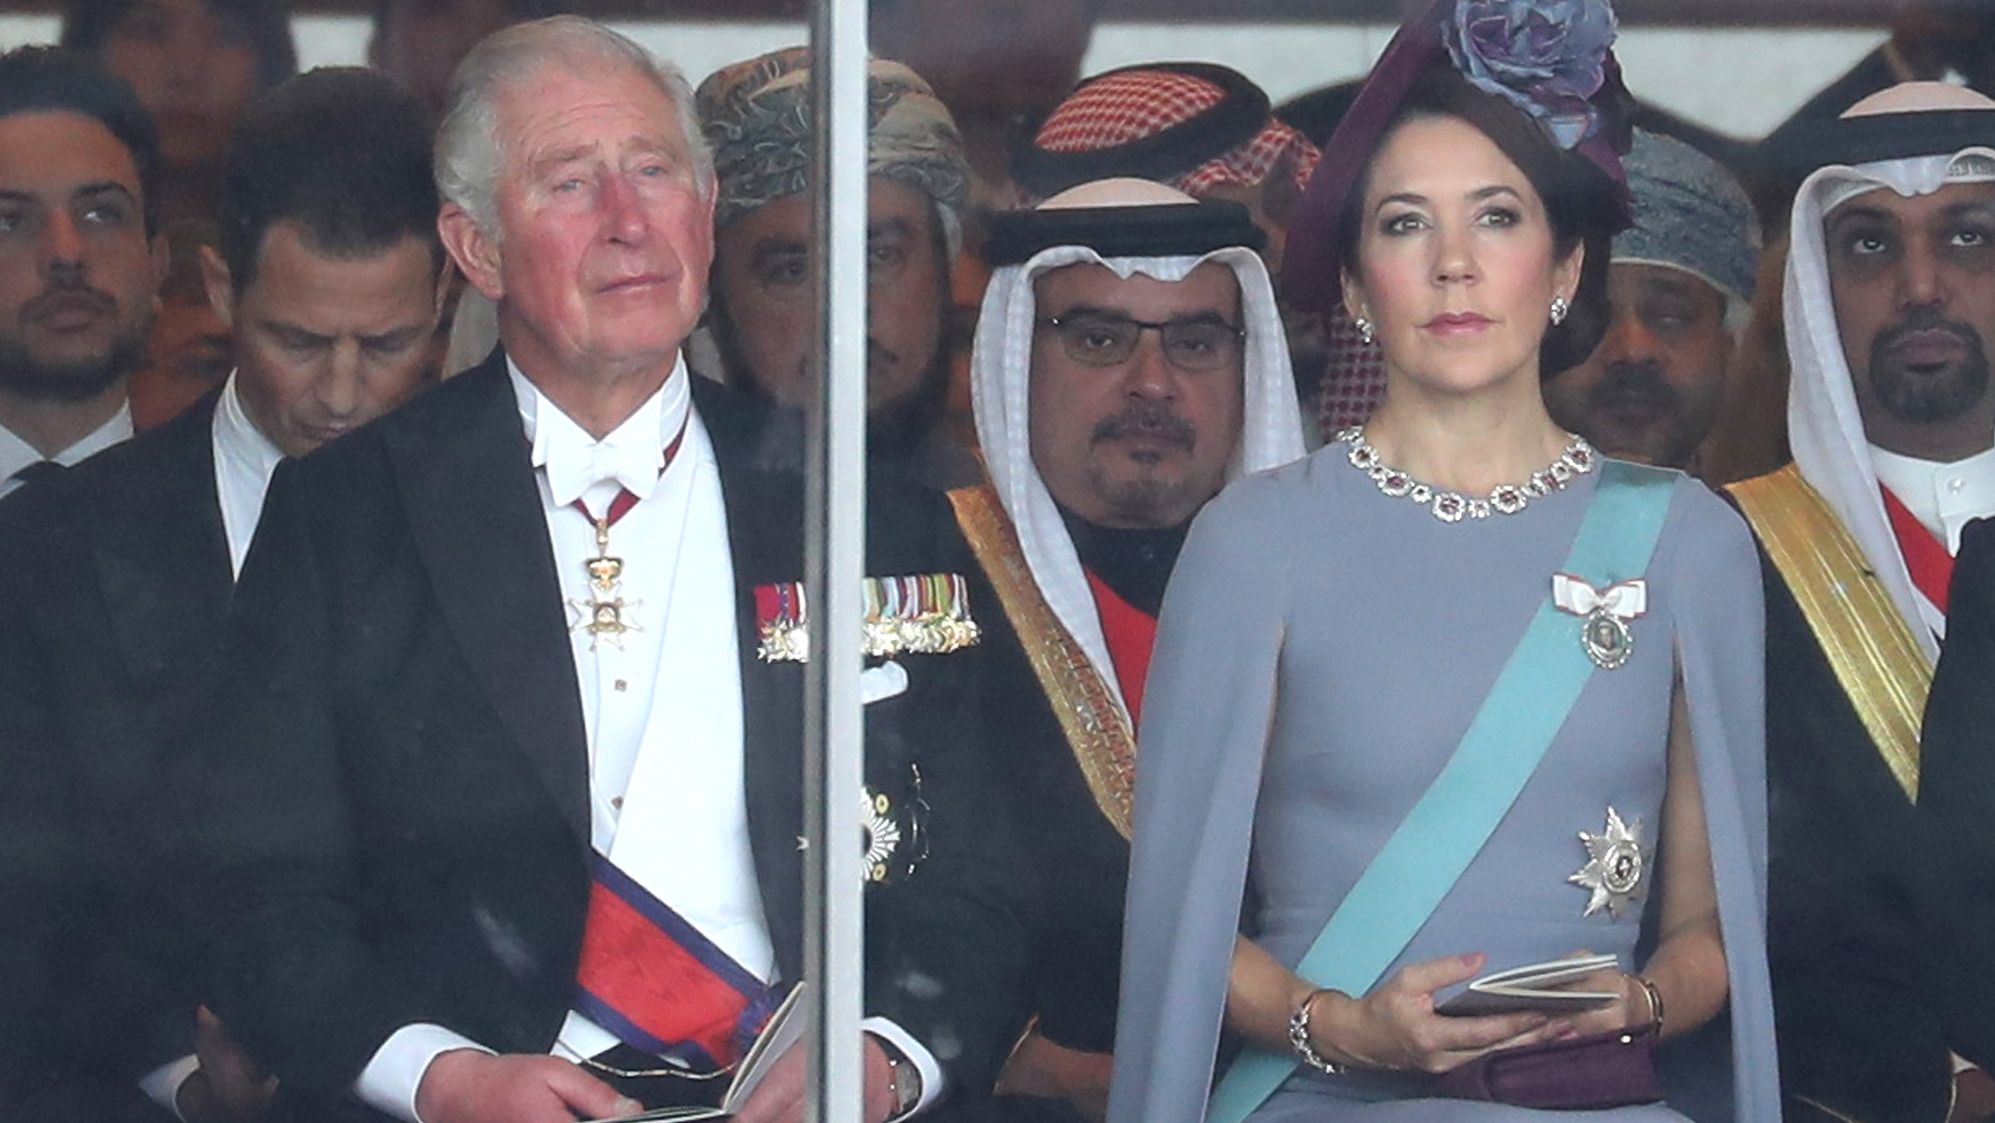 Prince Charles, Prince of Wales and Crown Princess Mary of Denmark wait for Emperor Naruhito's enthronement ceremony to begin.